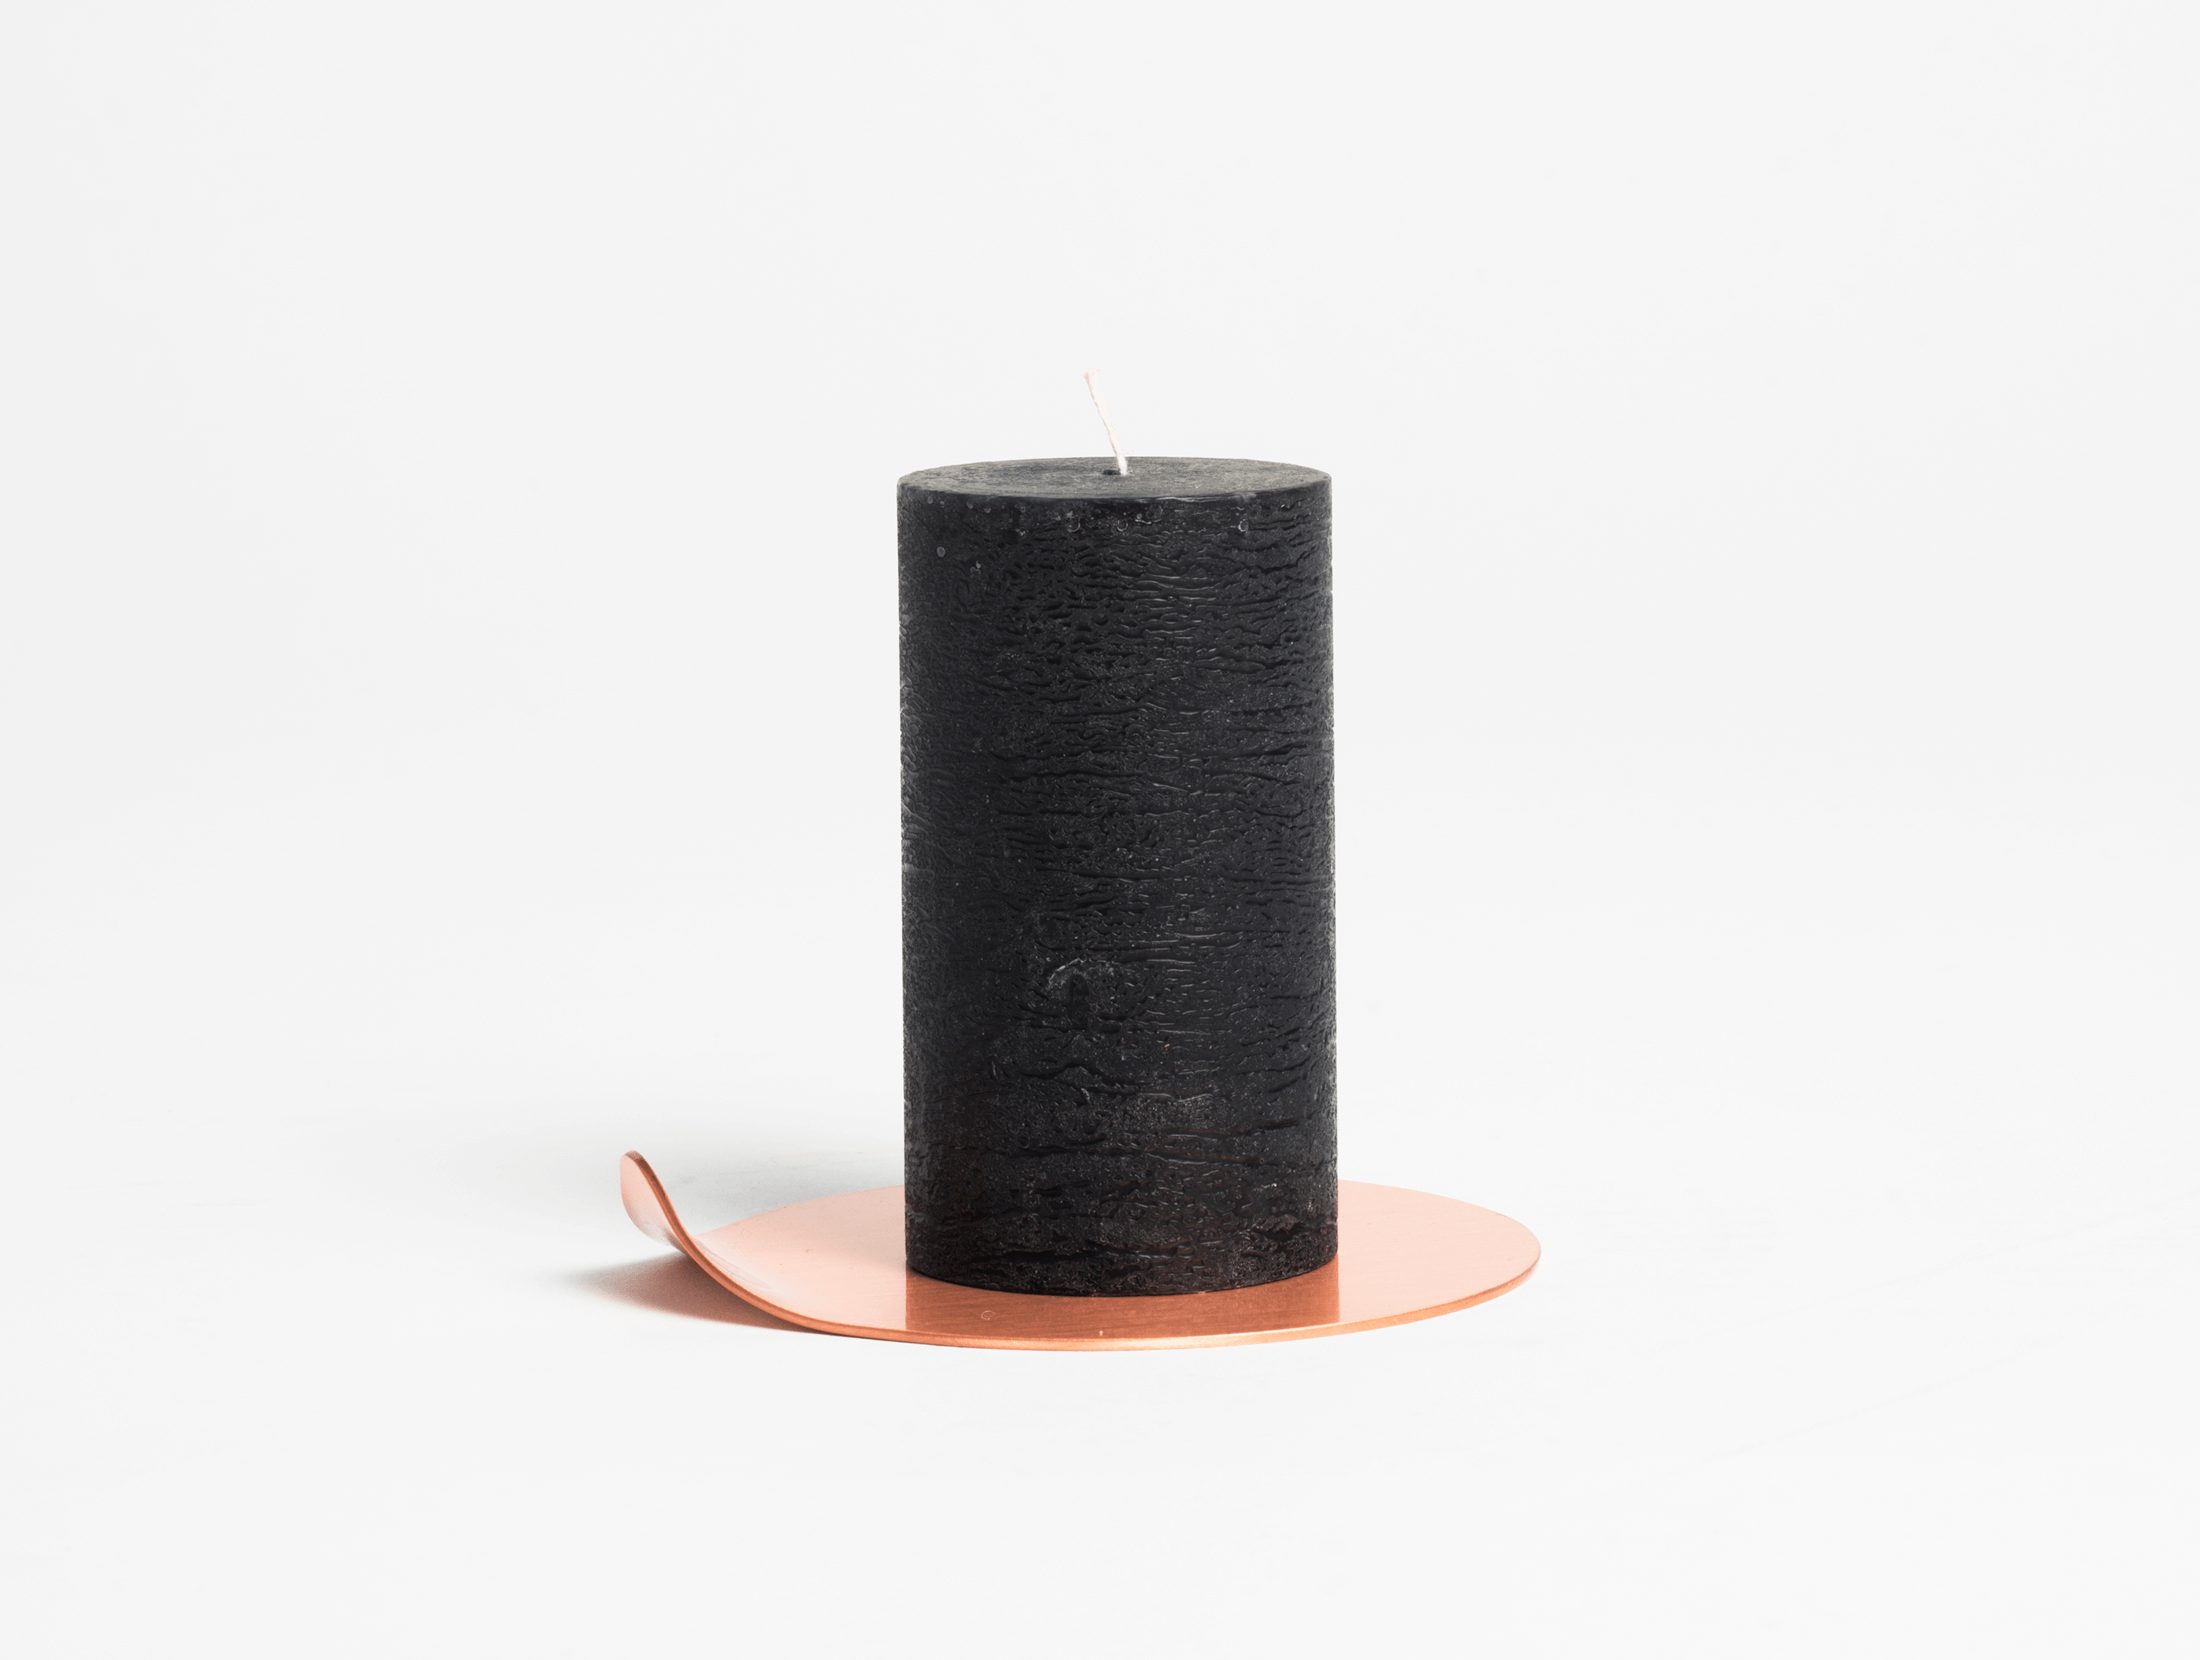 Chamberstick natural copper candle holder + free Chamber candle